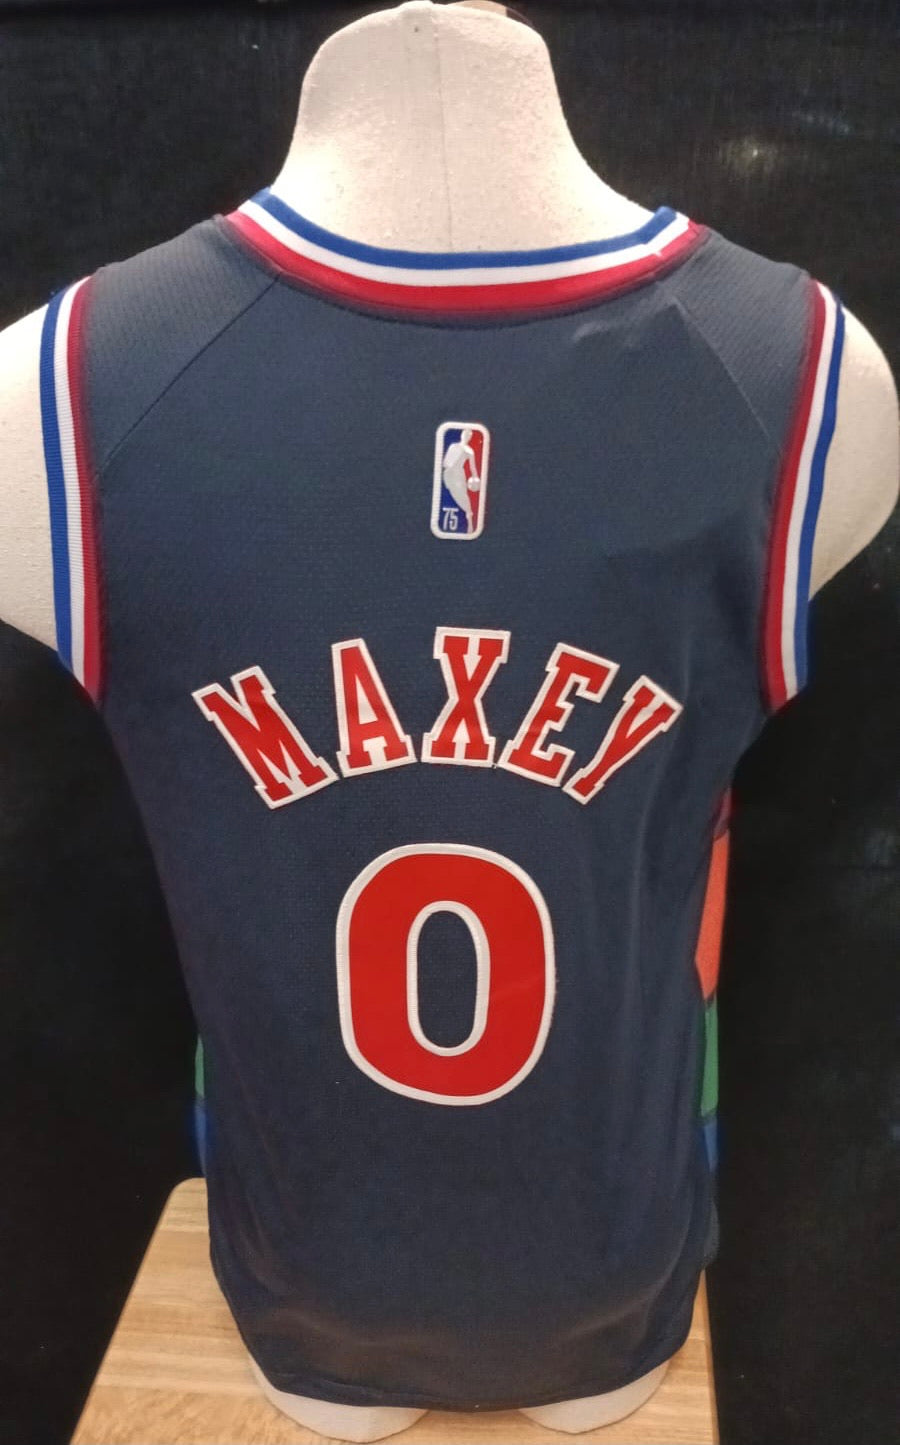 Tyrese Maxey 76ers Jersey - Tyrese Maxey Philadelphia 76ers Jersey - 76ers  new uniforms 